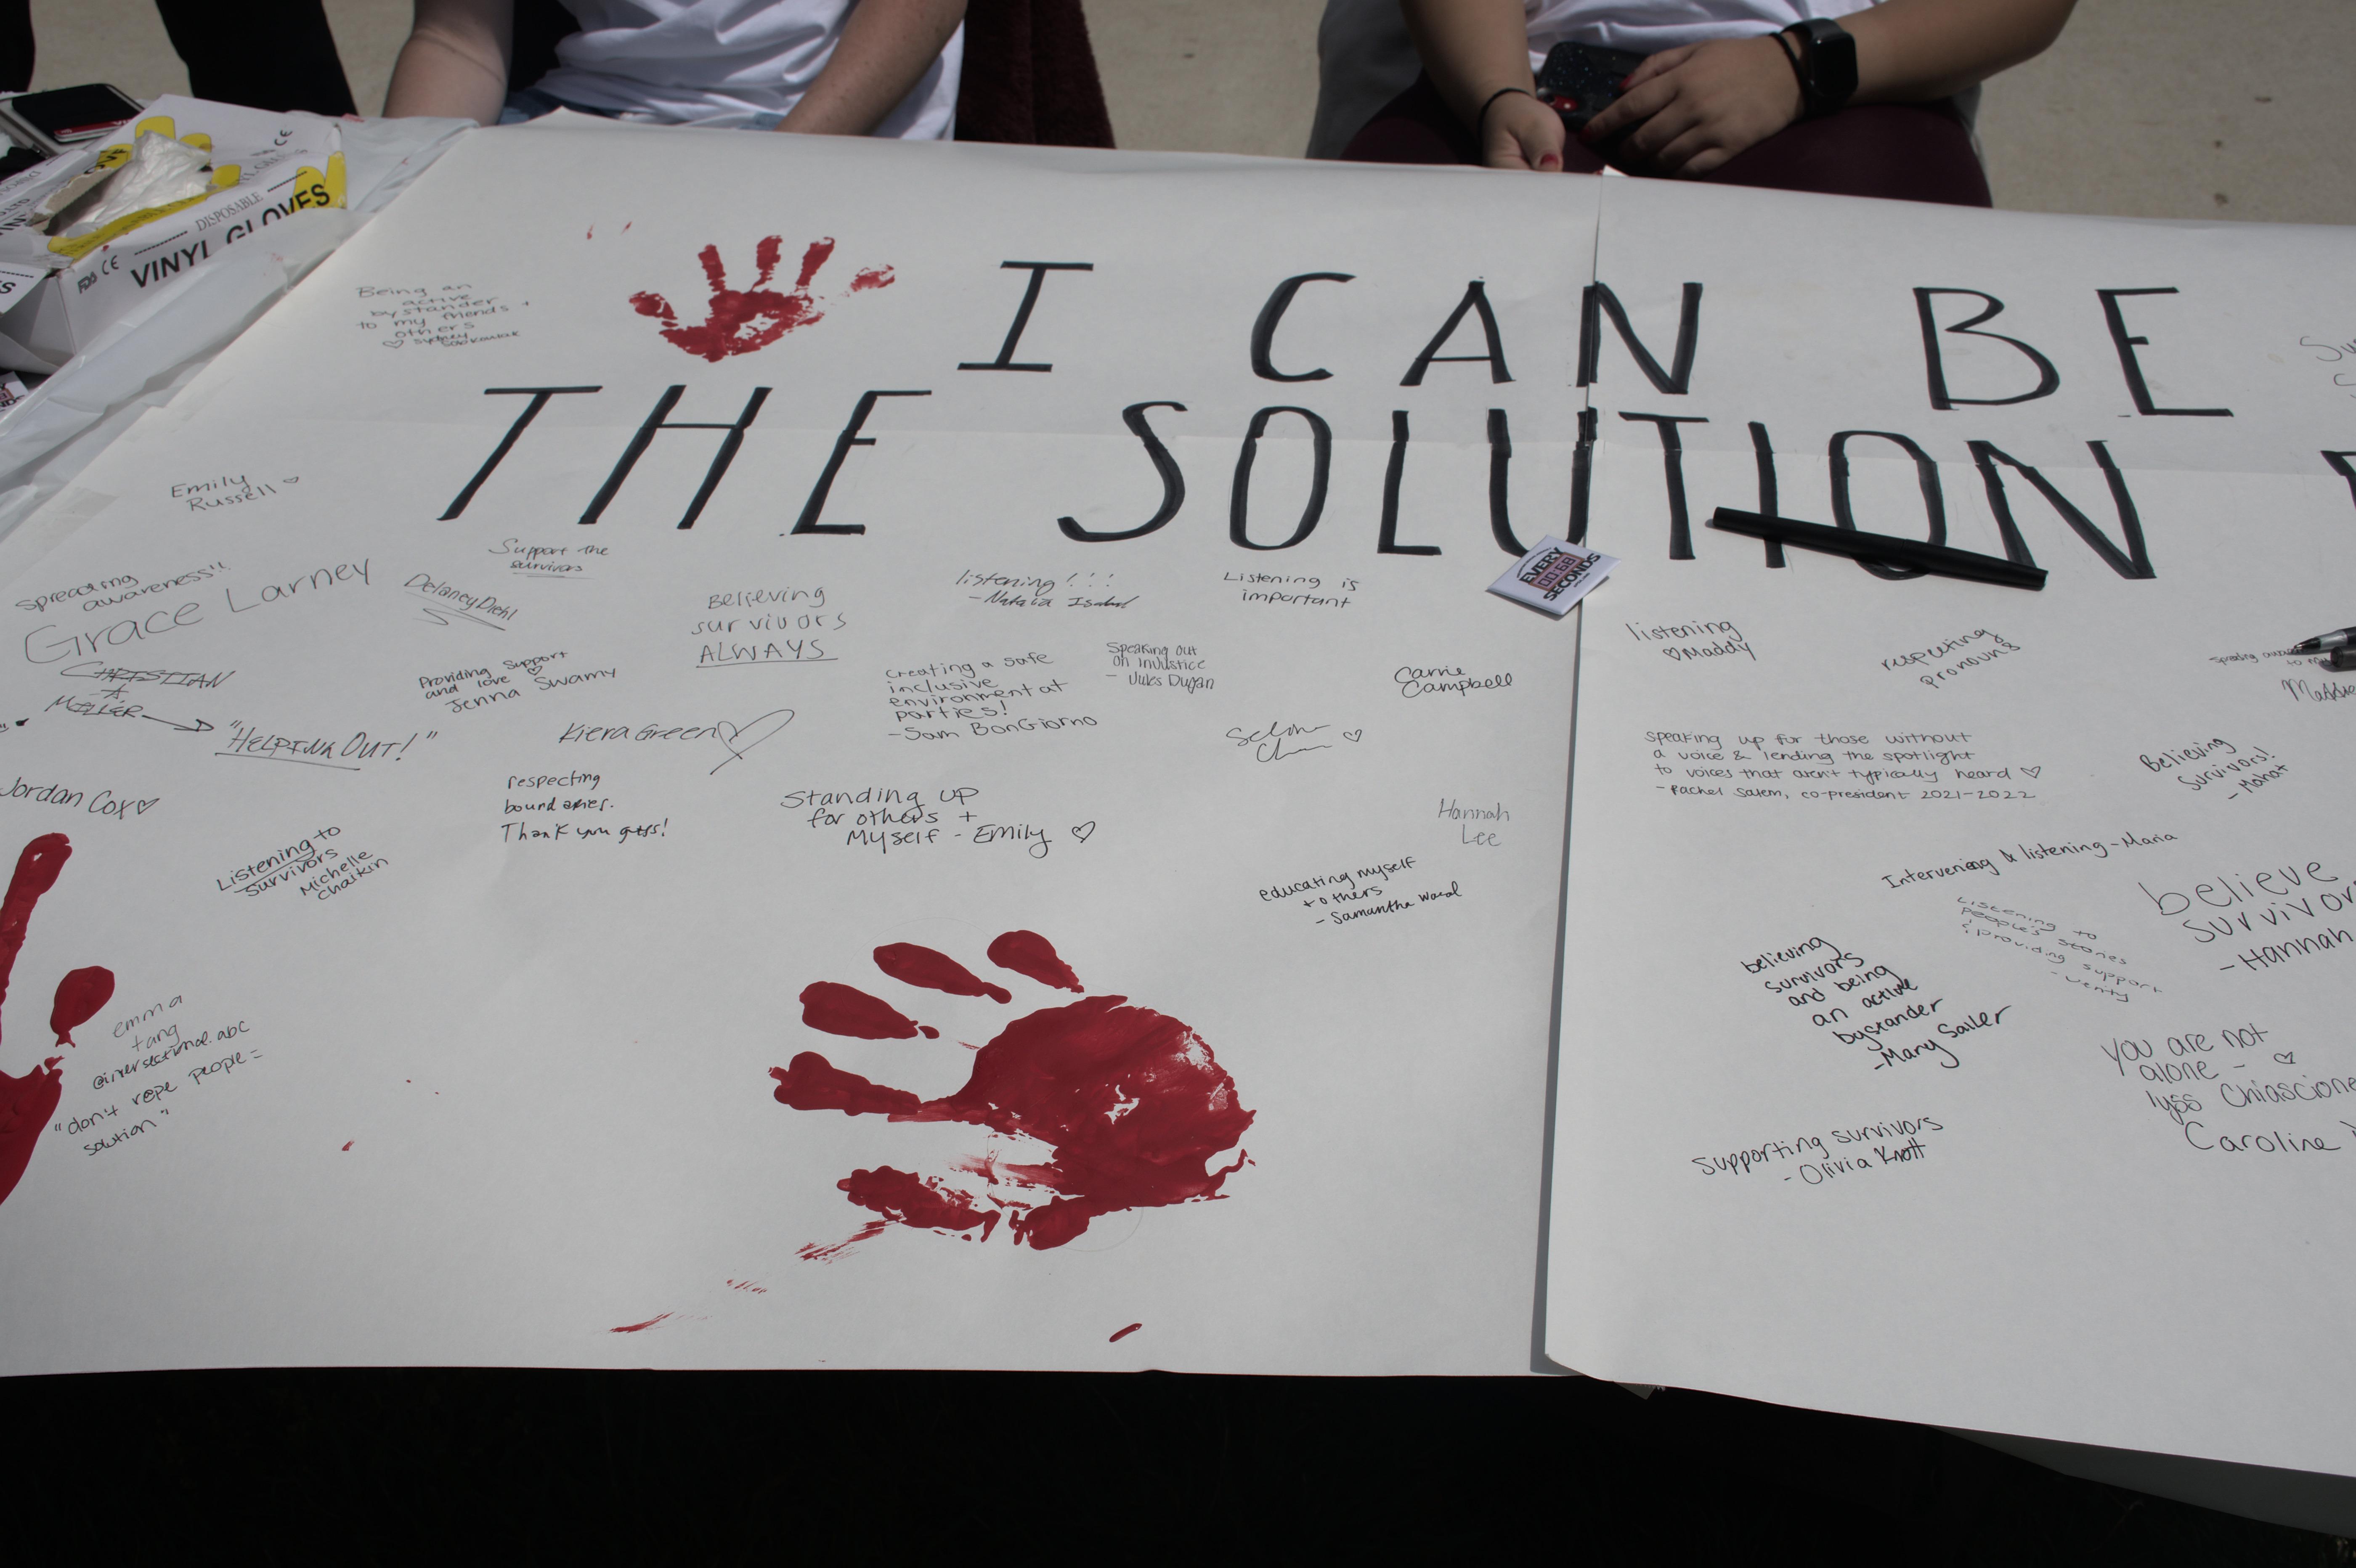 photo of poster. poster reads I can be the solution with student signatures.